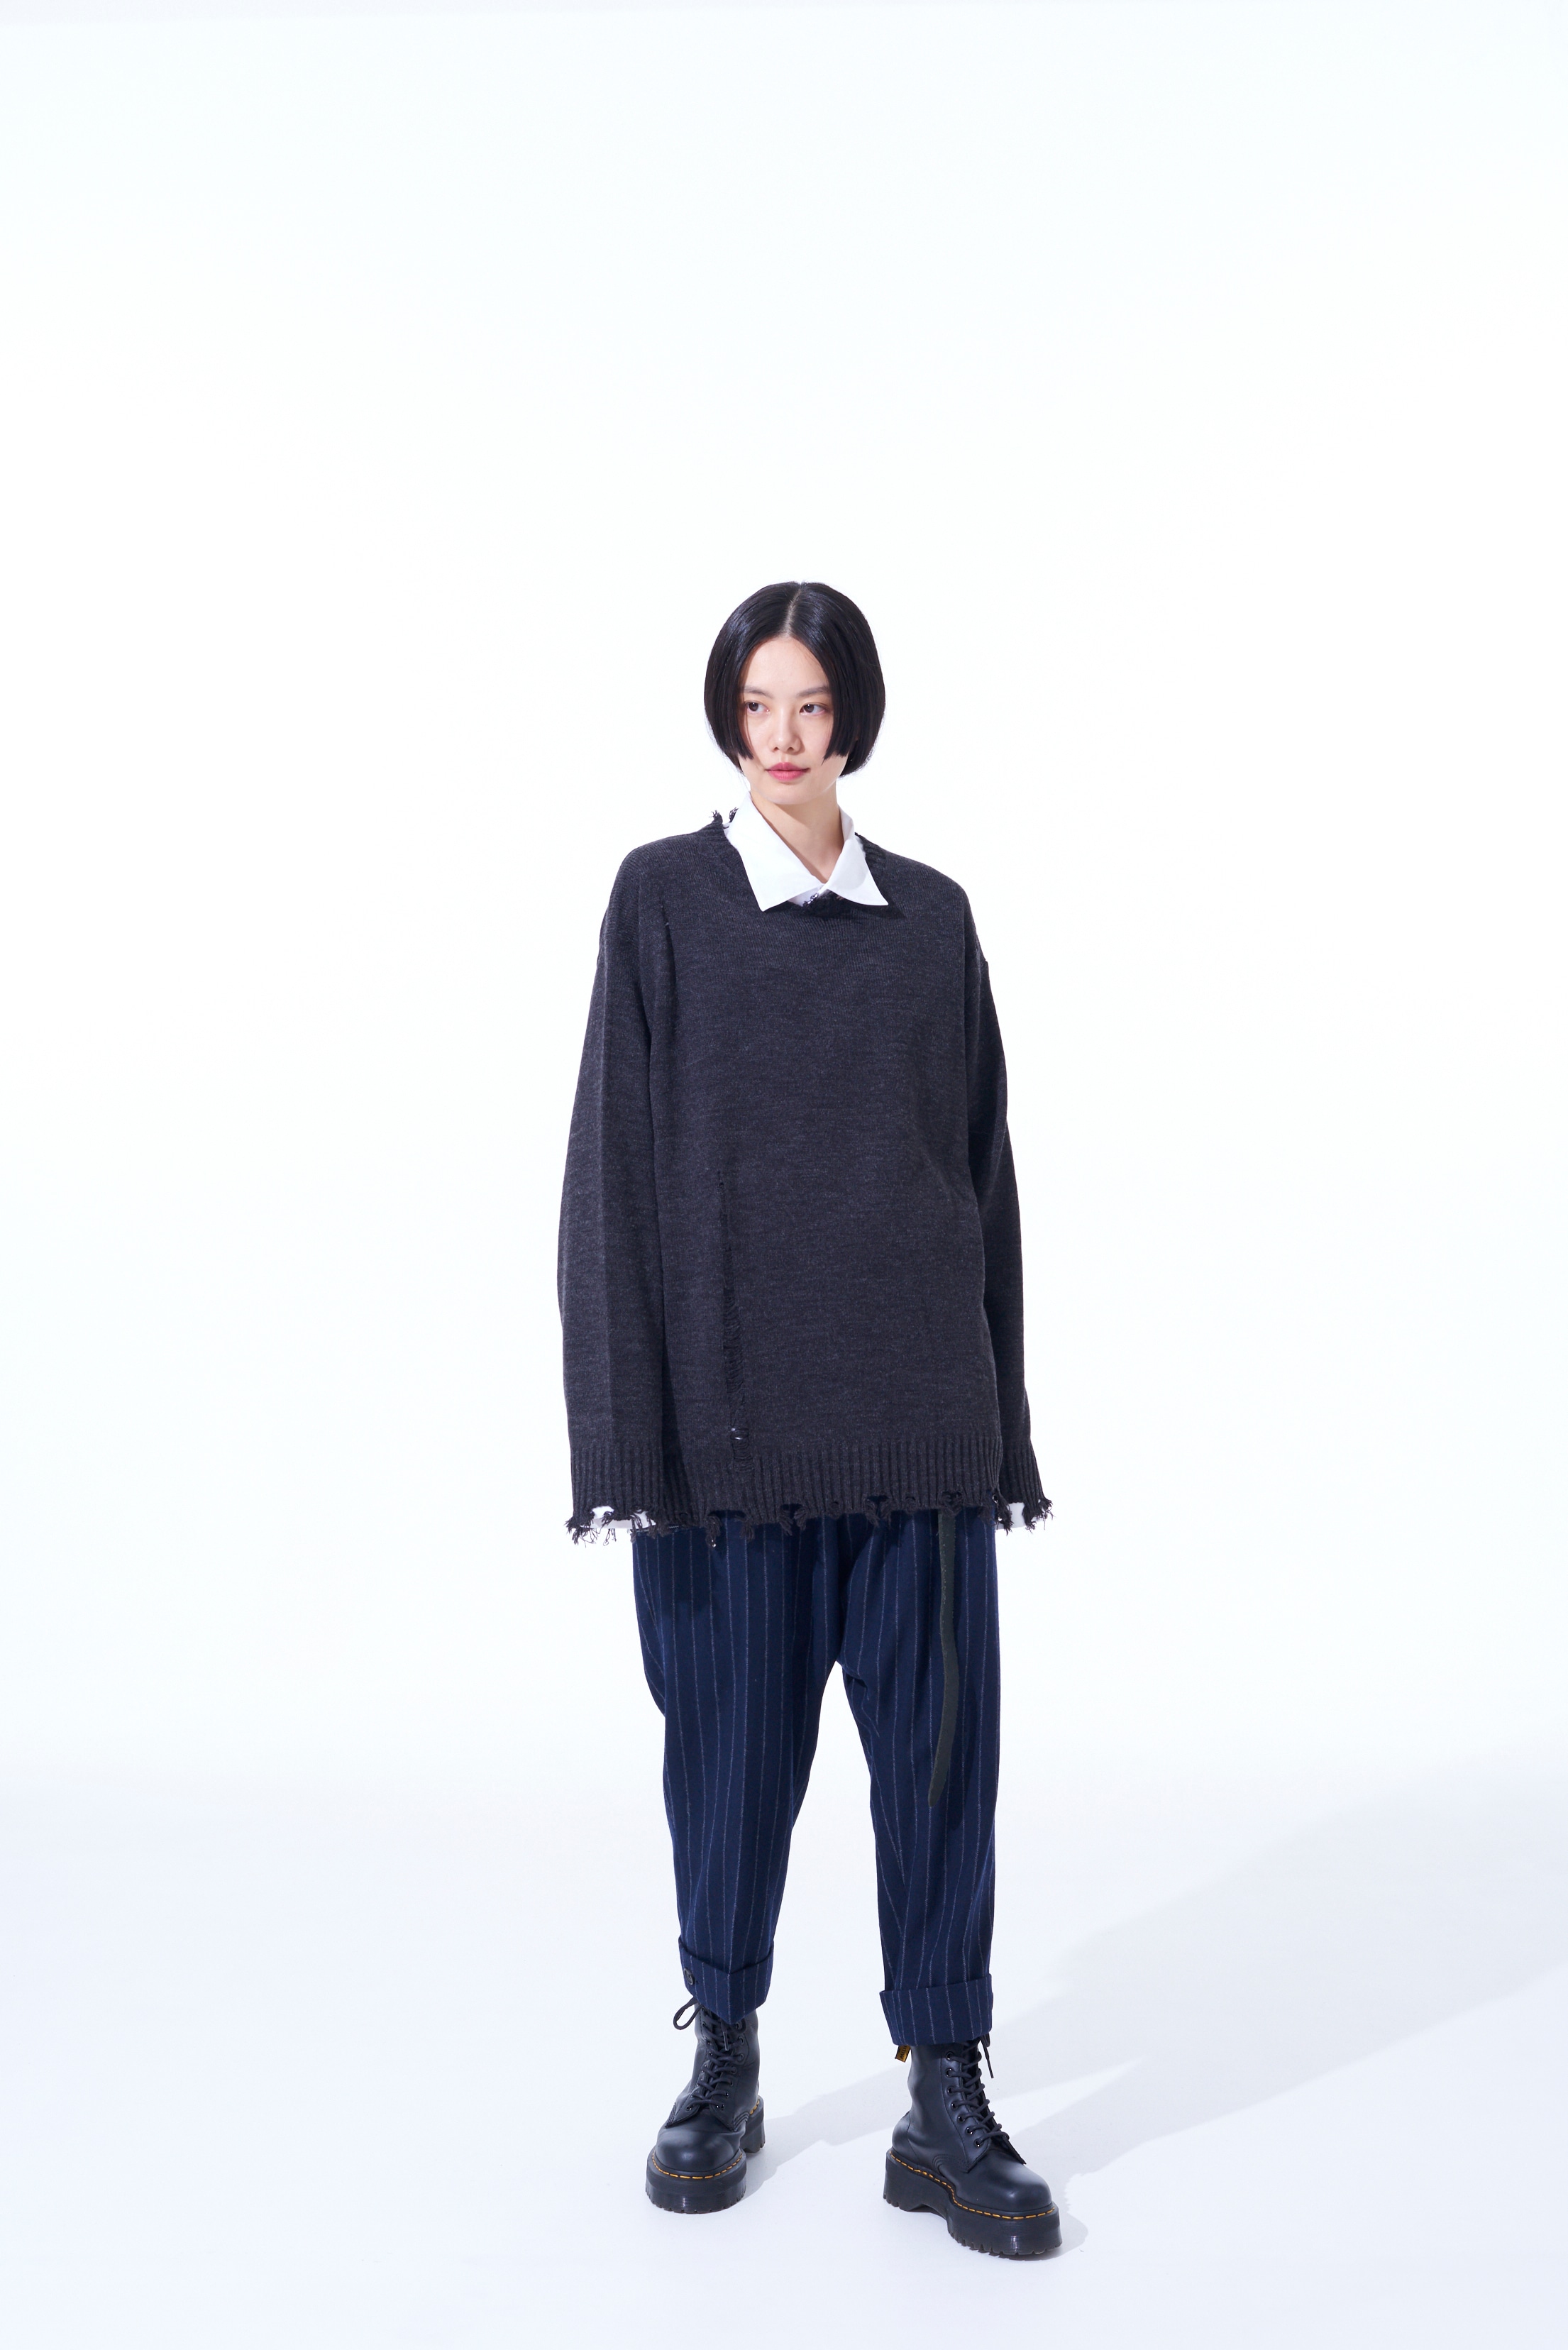 7G BULKY WOOL DAMAGE ROUND NECK PULLOVER